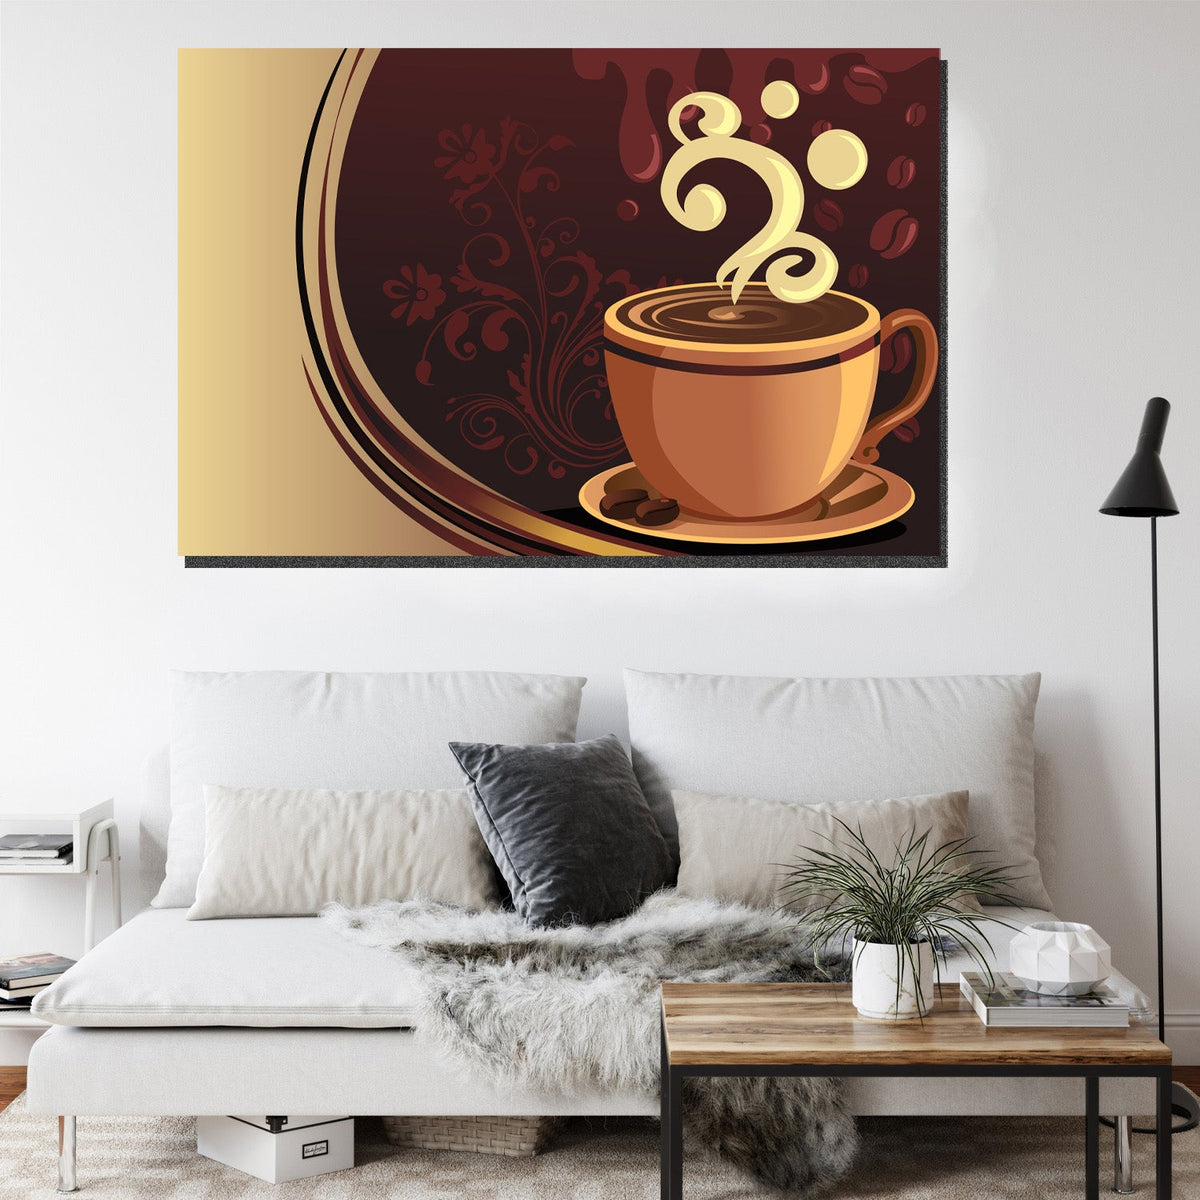 https://cdn.shopify.com/s/files/1/0387/9986/8044/products/CoffeeCupPosterCanvasArtprintStretched-4.jpg